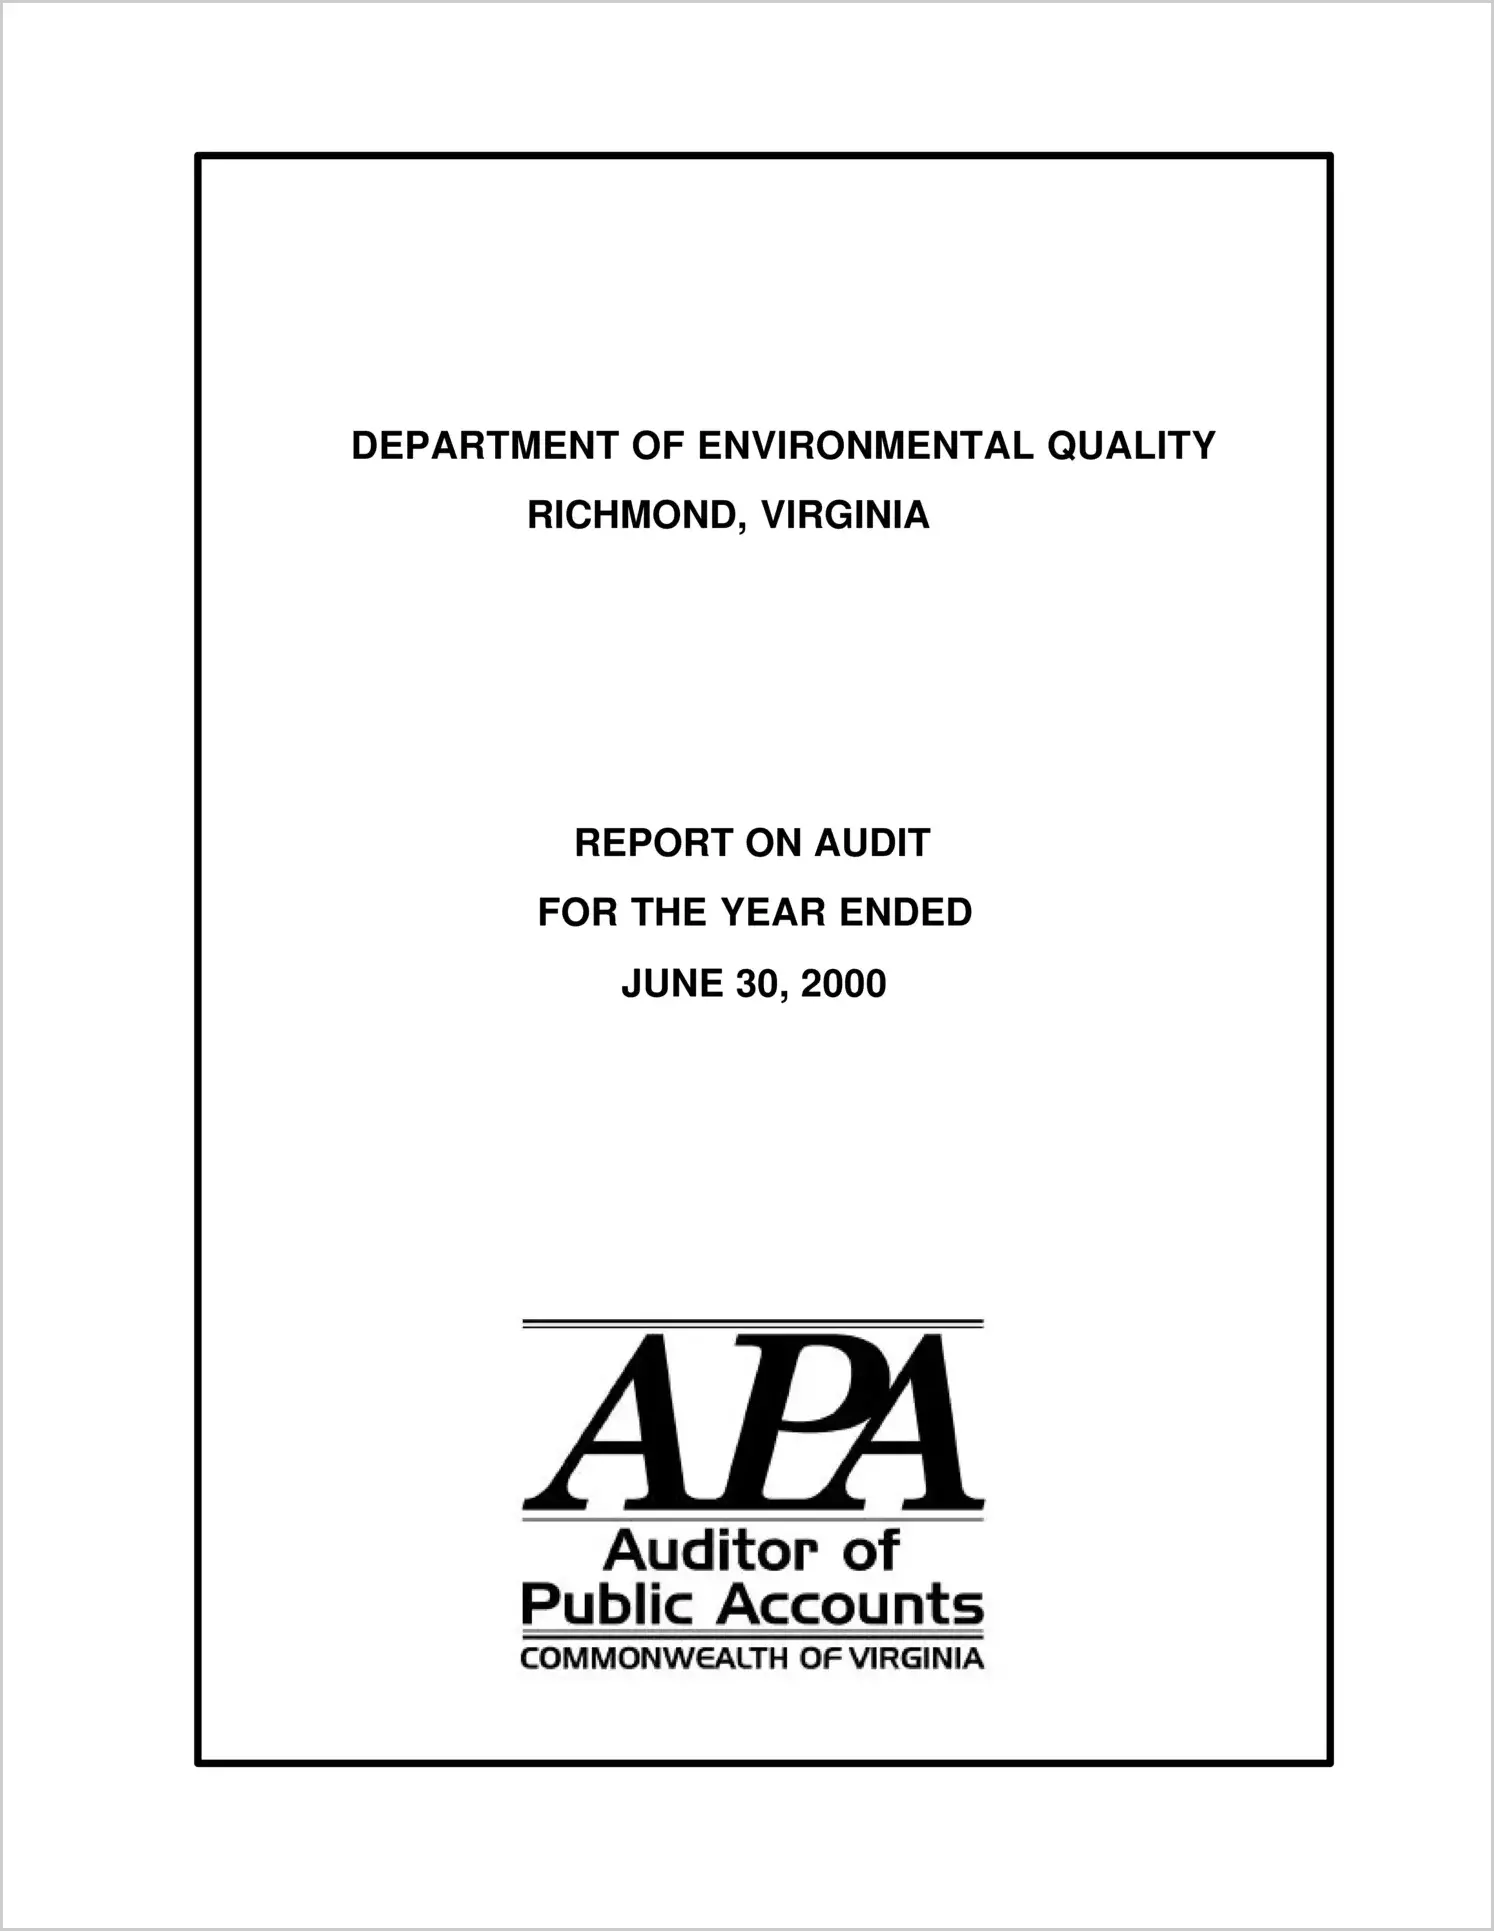 Department of Environmental Quality for the year ended June 30, 2000